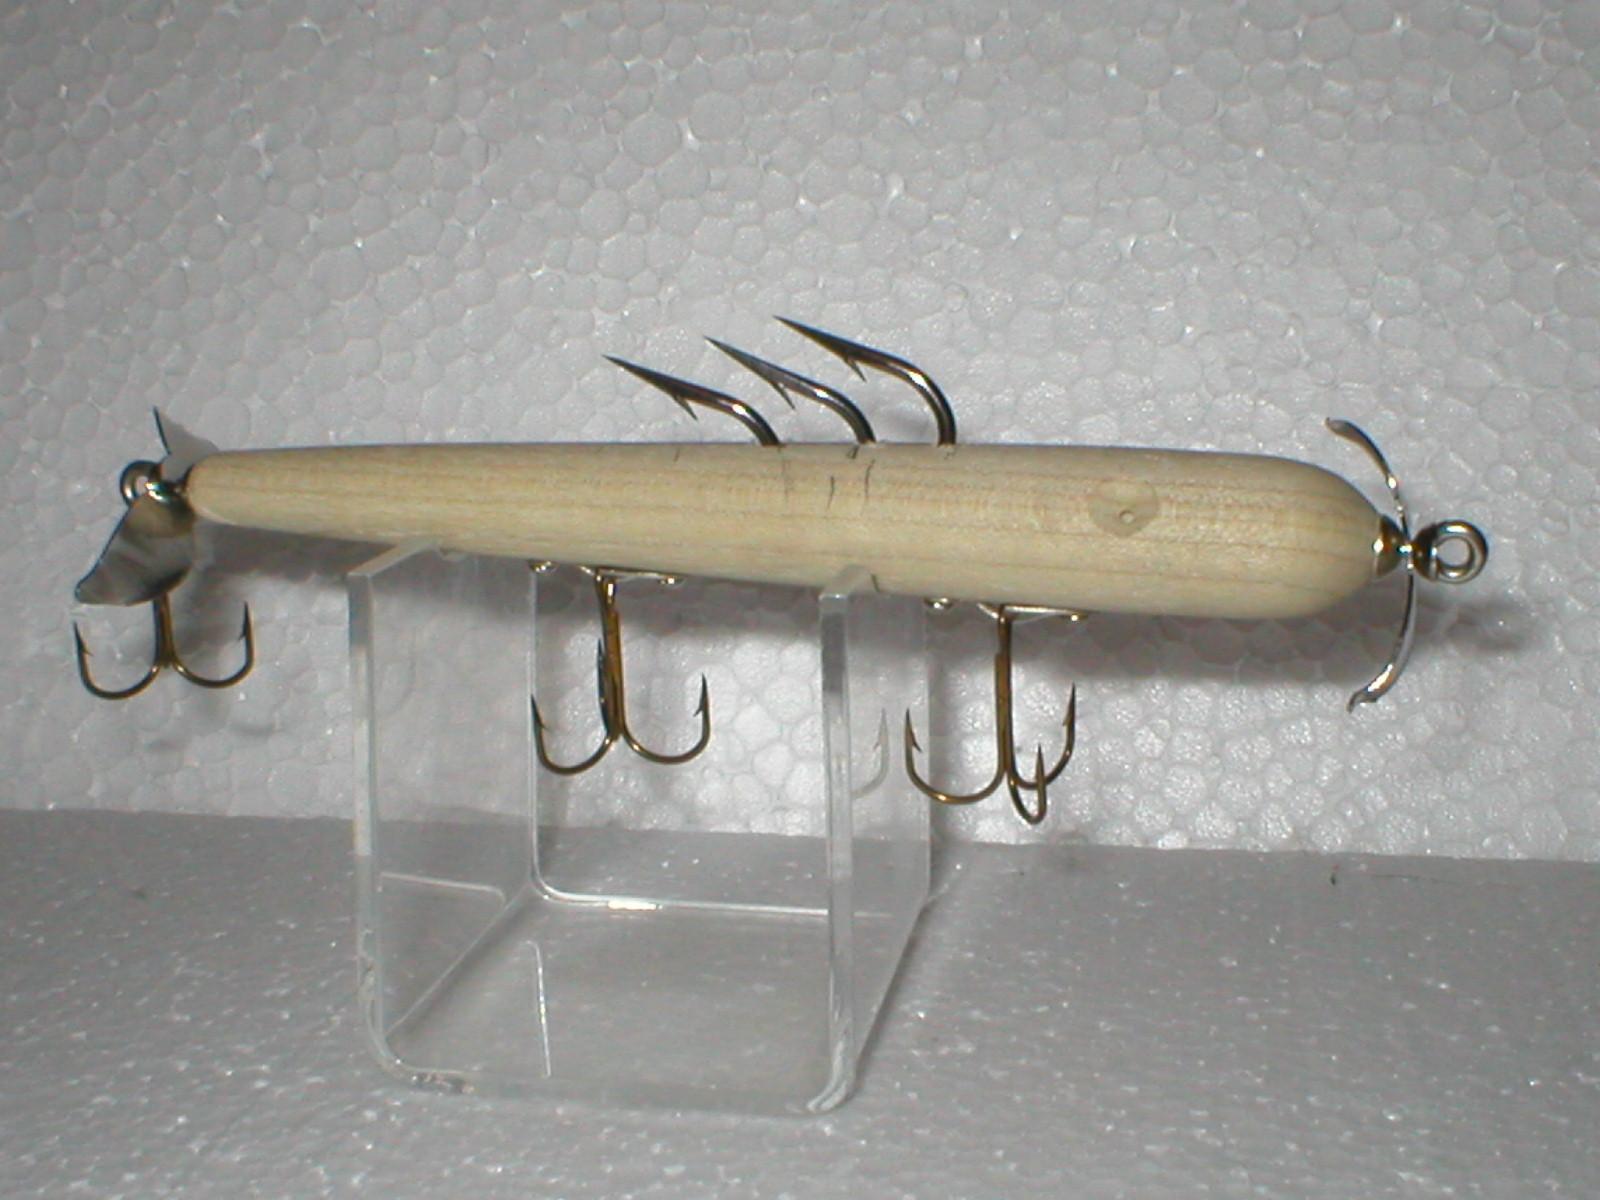 Live Wire replica in bare wood. - Hard Baits - TackleUnderground